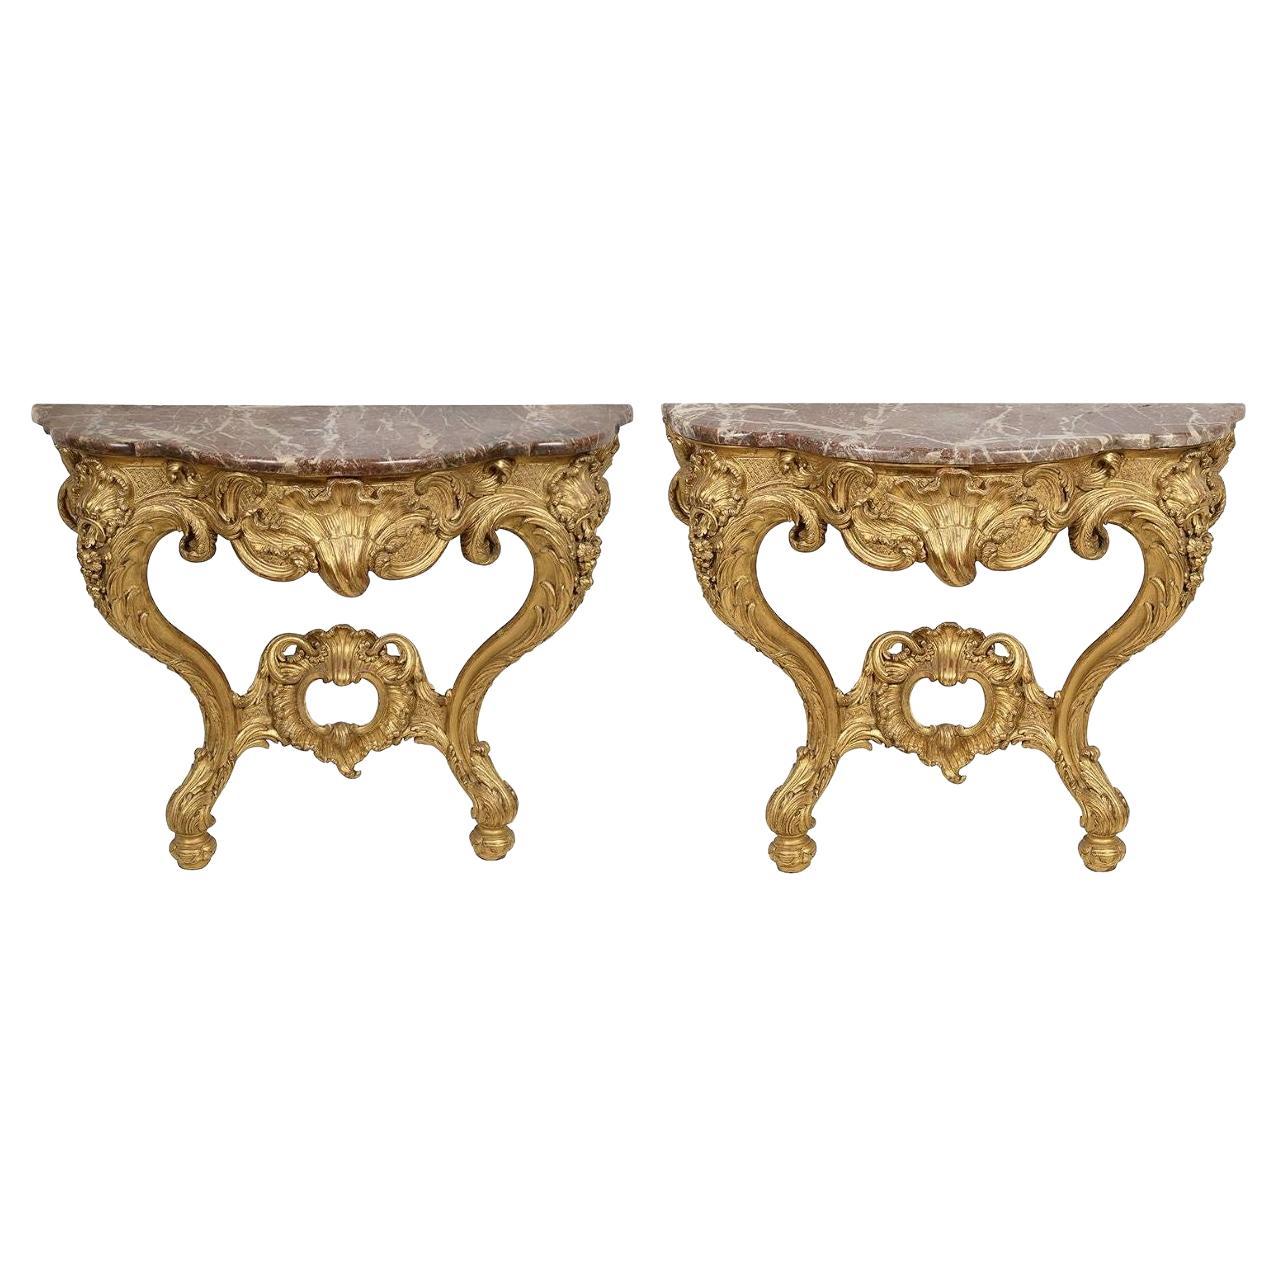 Pair French Carved Giltwood Console Tabels, circa 1840